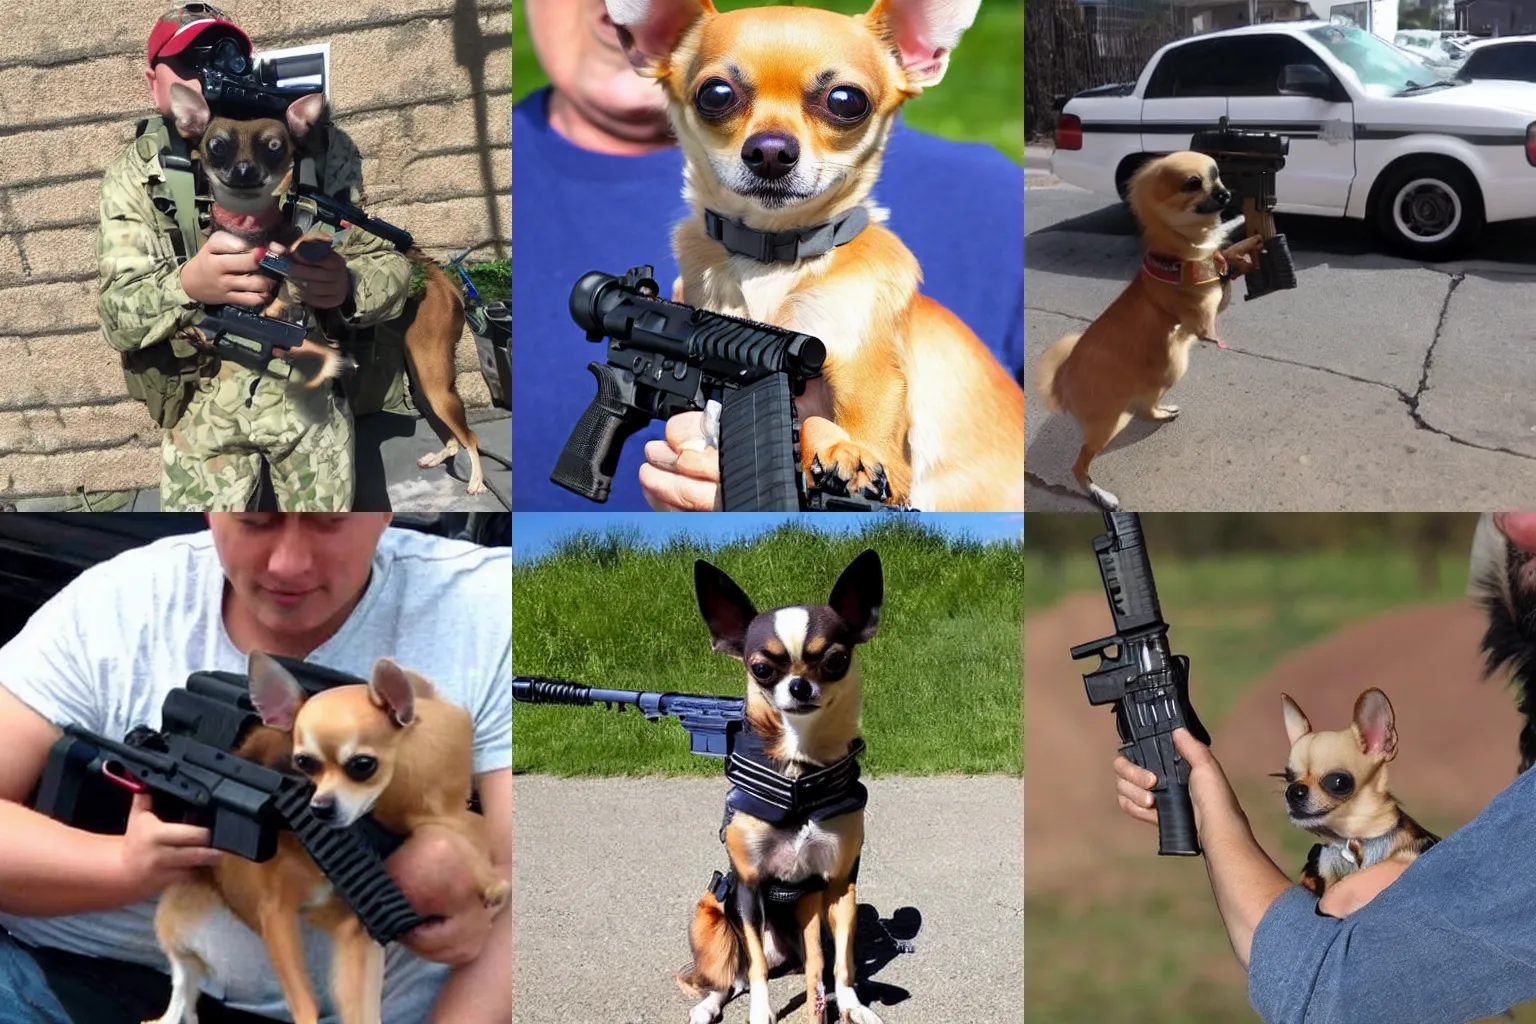 Prompt: chihuahua dog. holding an ar - 1 5, aiming